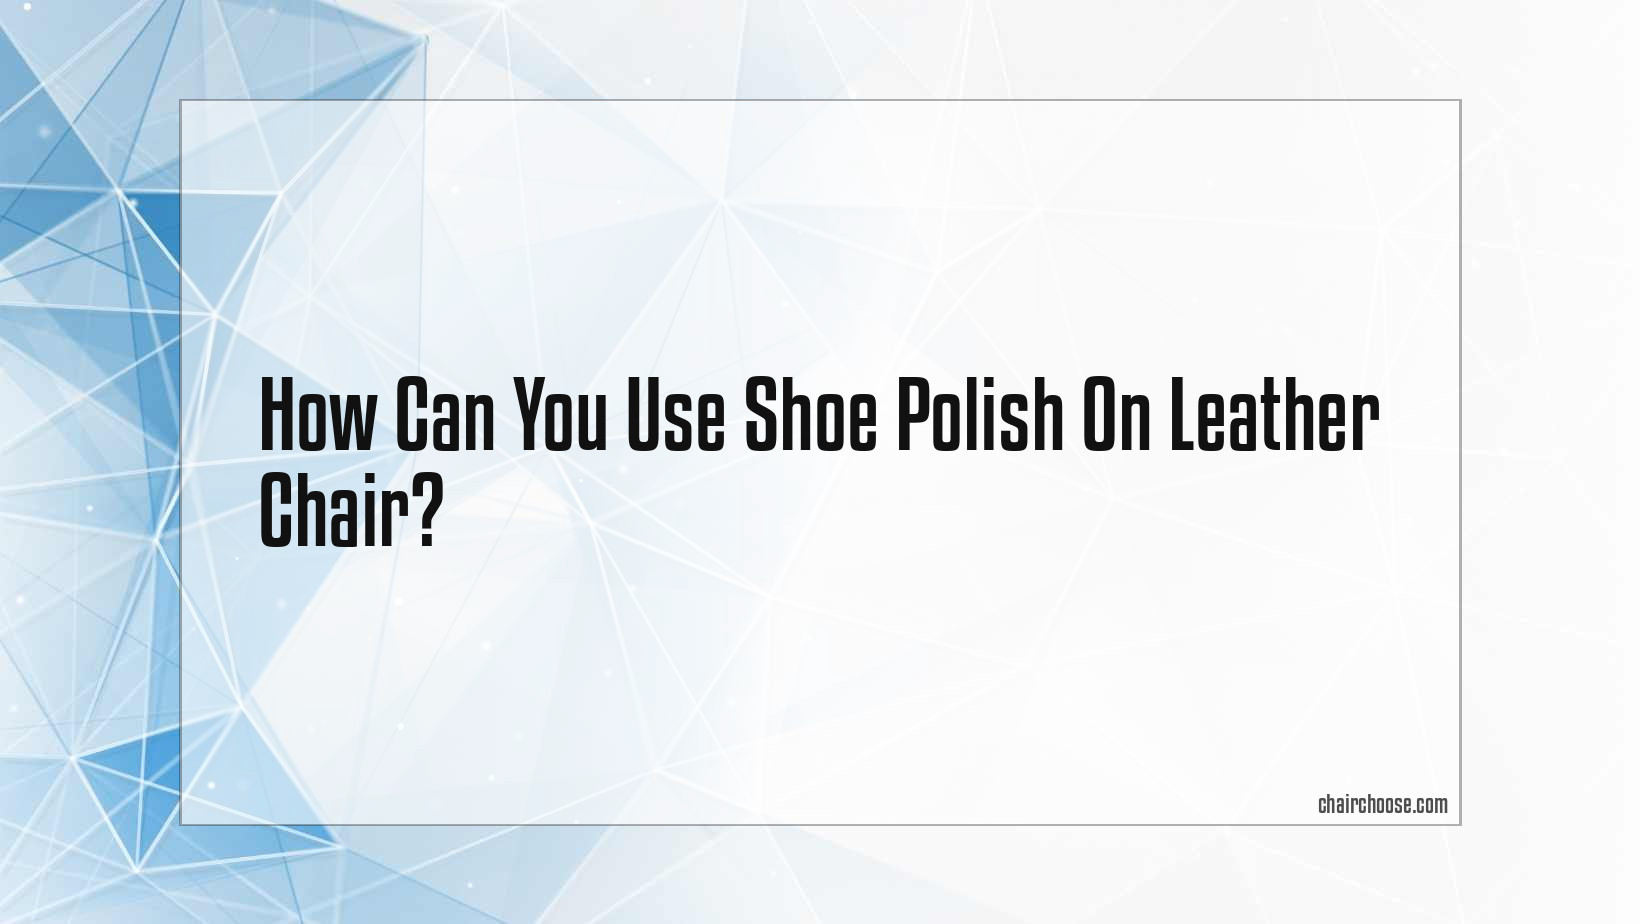 How Can You Use Shoe Polish On Leather Chair?